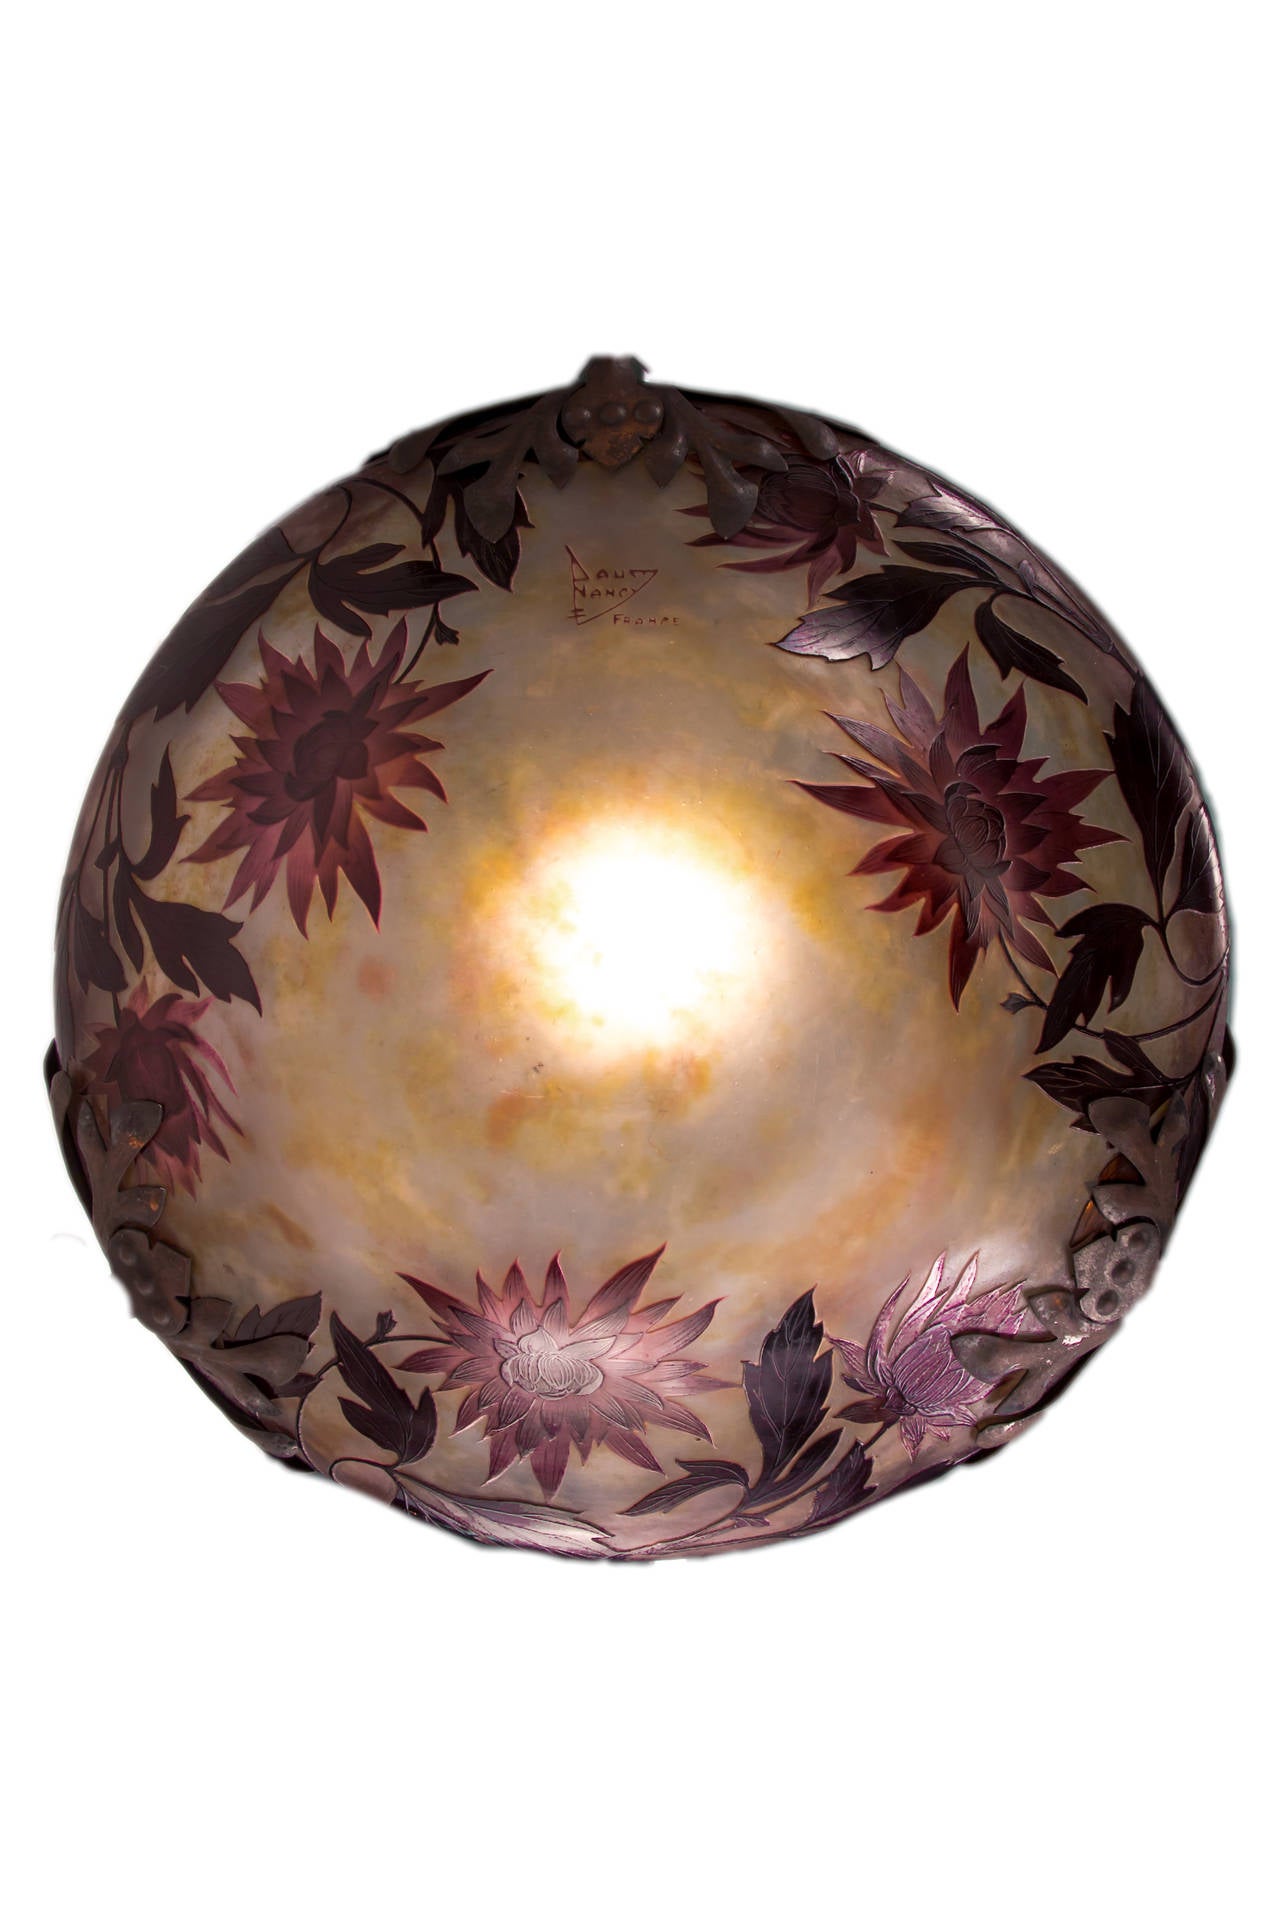 A fine French Art Nouveau cameo carved glass and bronze chandelier by, Daum Nancy decorated with a central craved cameo plafonnier with purple-plum color floral and vine decoration against a mottled opaque white - yellow background further enhanced